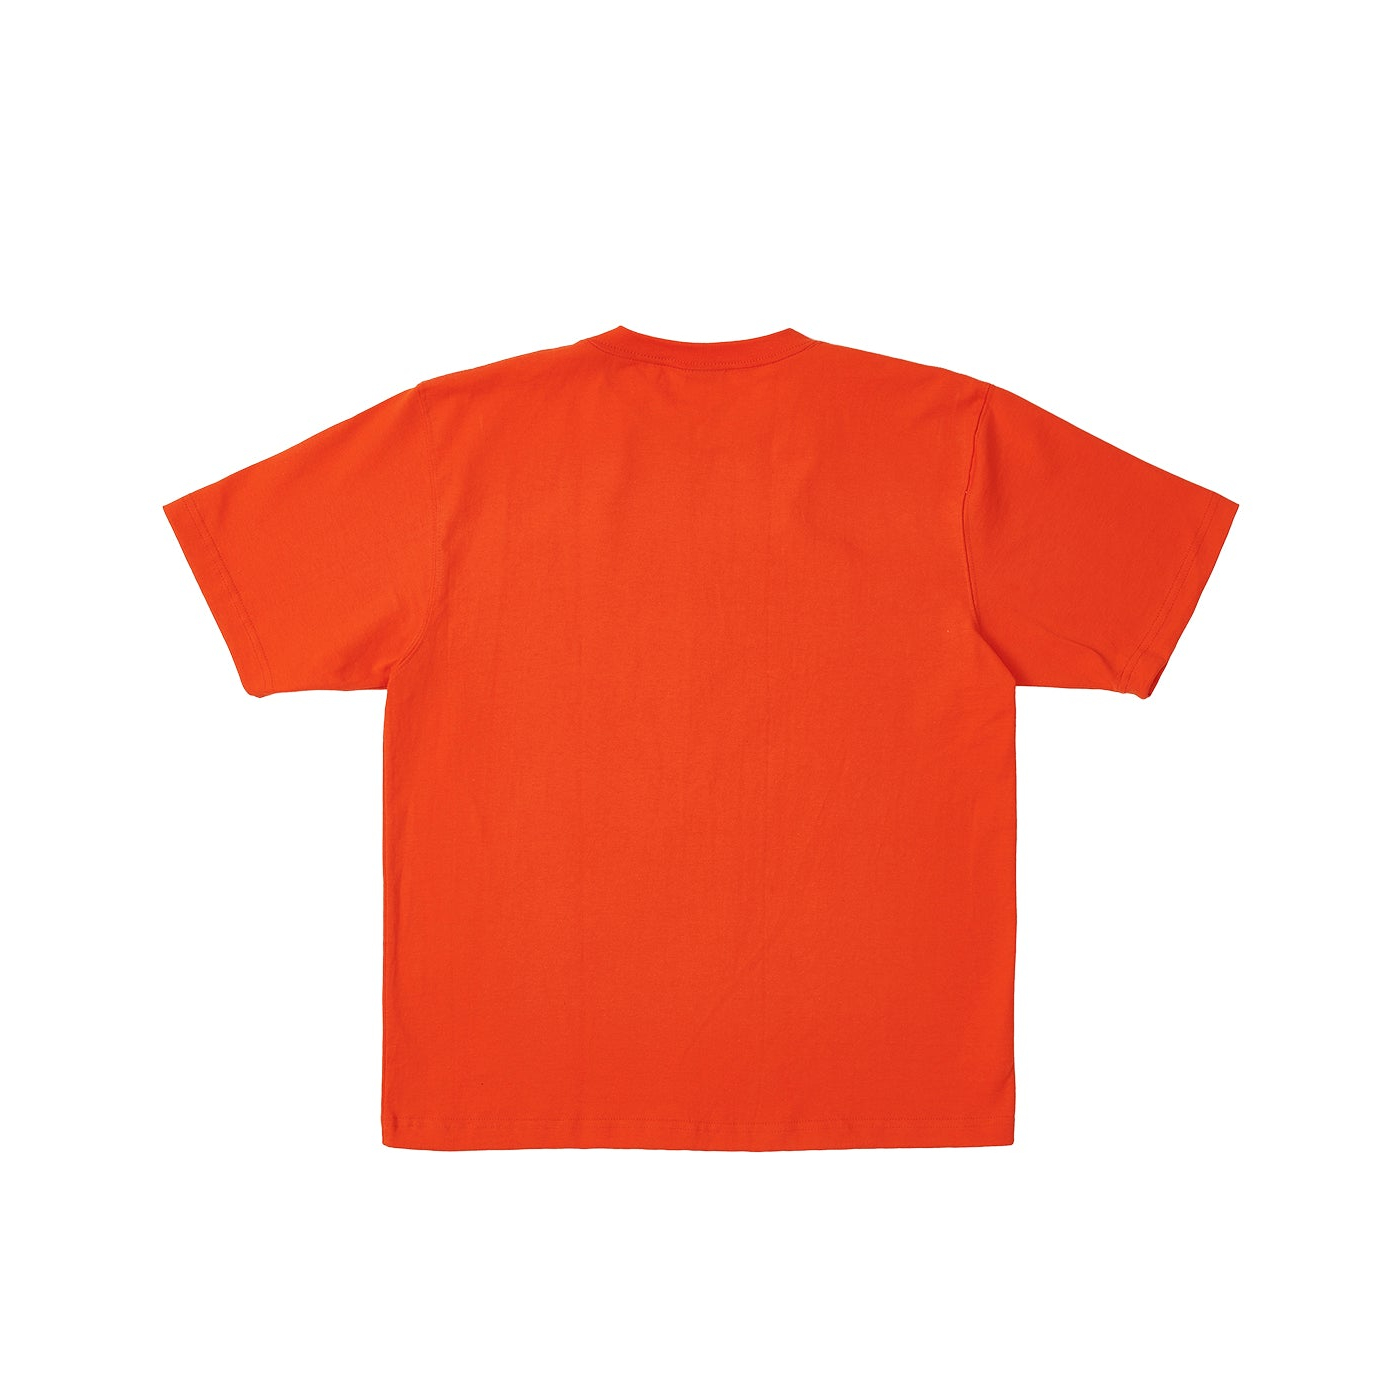 Thumbnail PALACE CAMBER T-SHIRT BURNT ORANGE one color